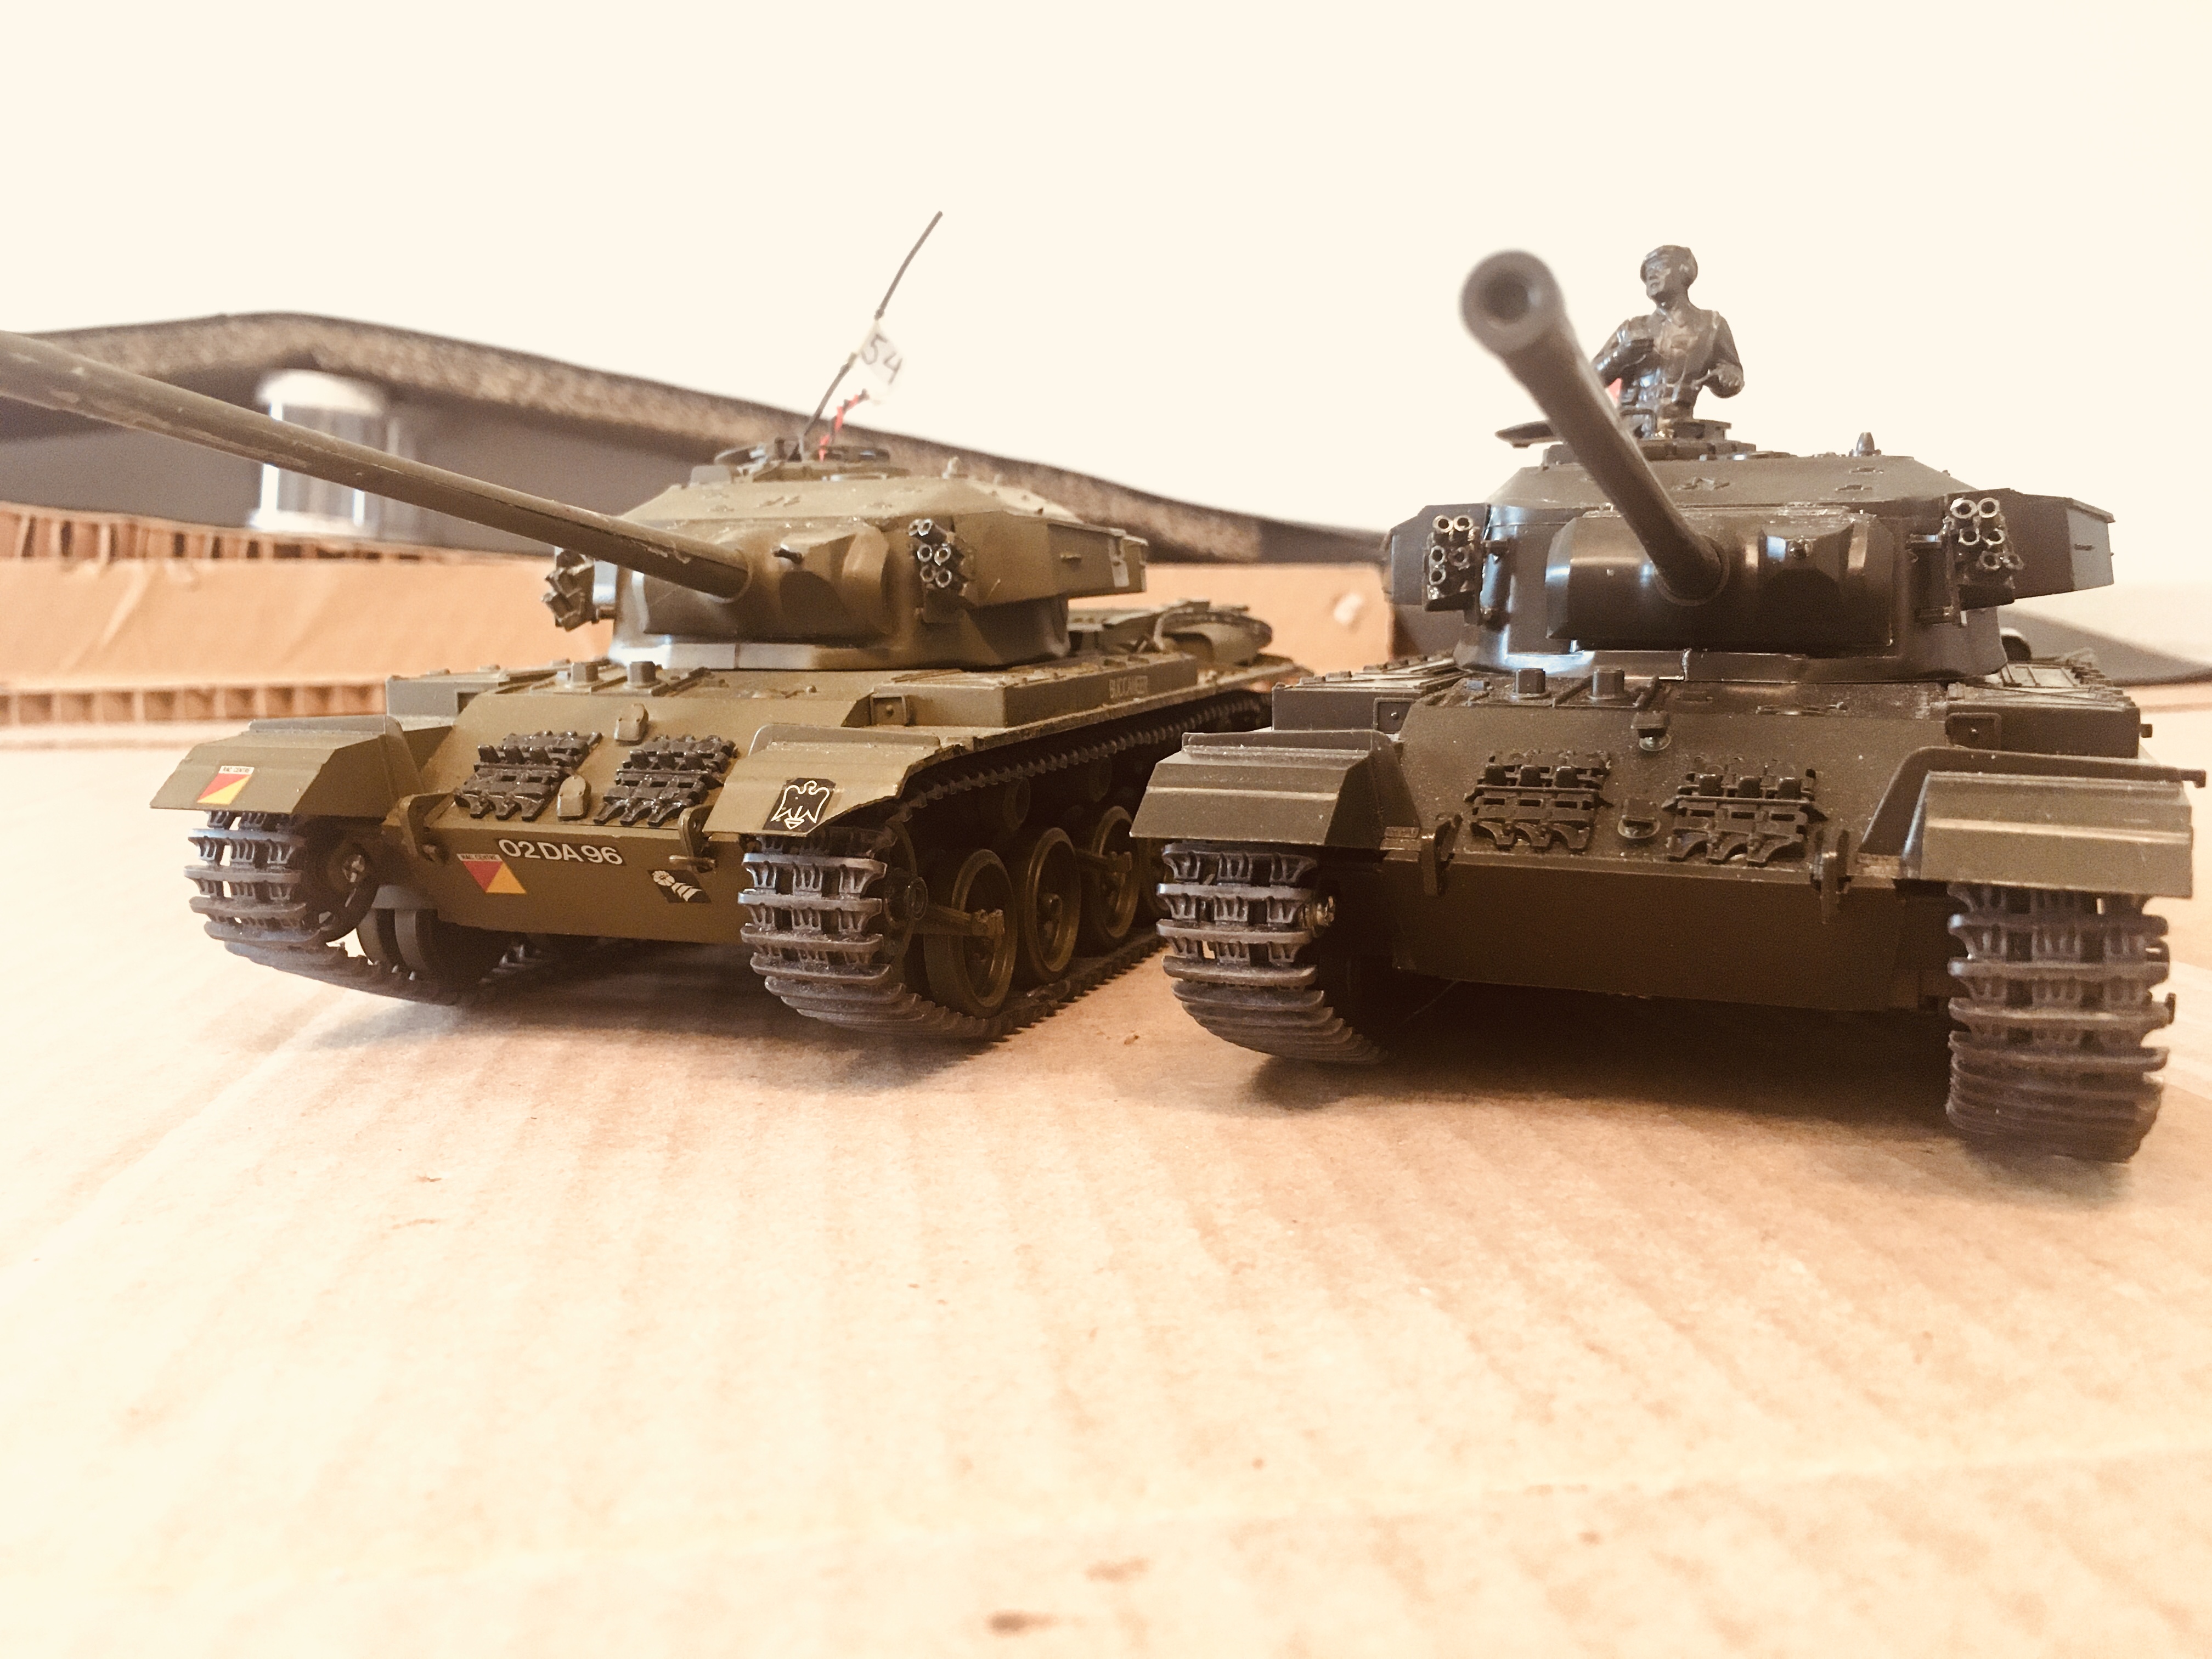 I have two RRC Centurion tanks to work with